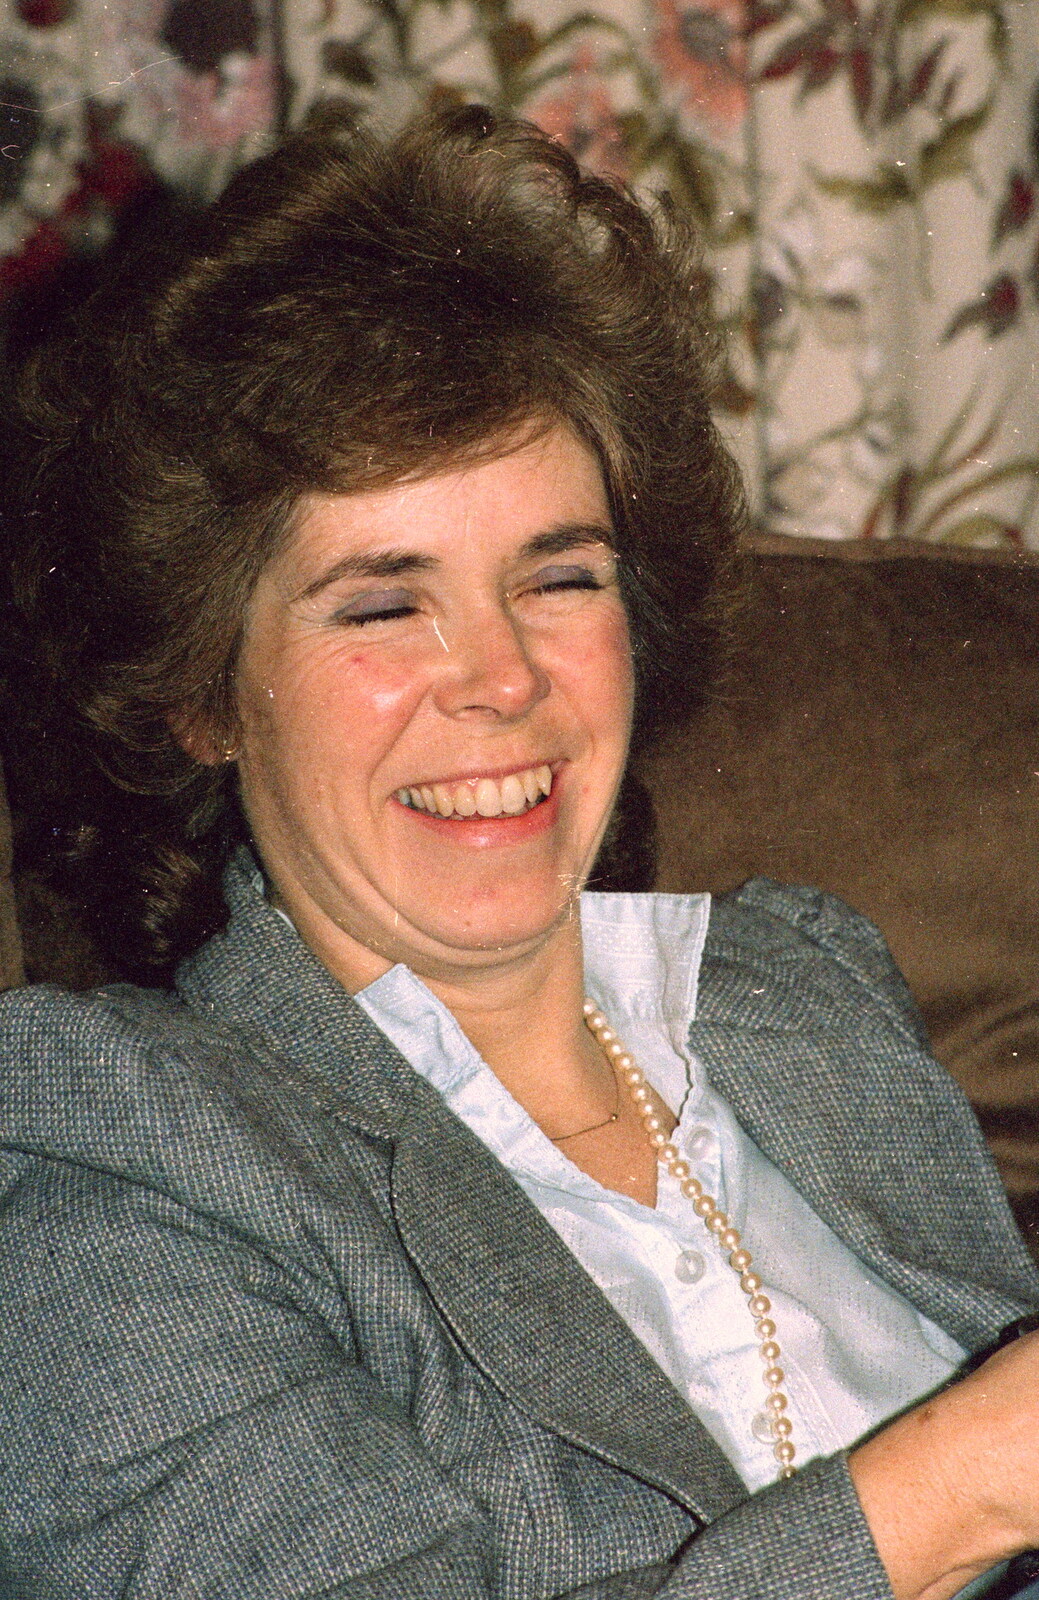 Bernice from New Year's Eve at Anna's, Walkford, Dorset - 31st December 1985